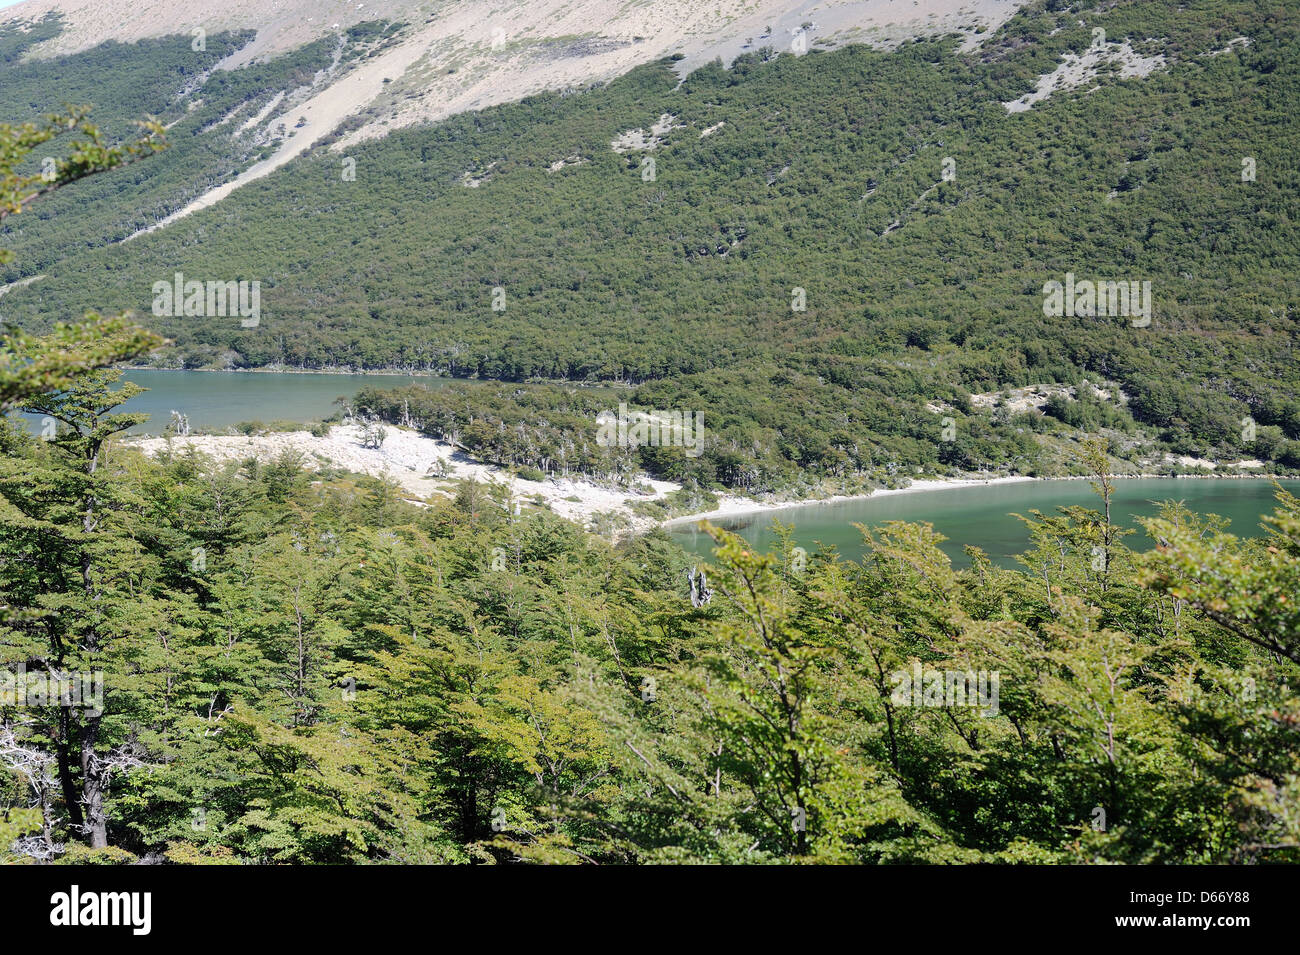 An ancient glacial terminal moraine divides two lakes at different levels. Stock Photo